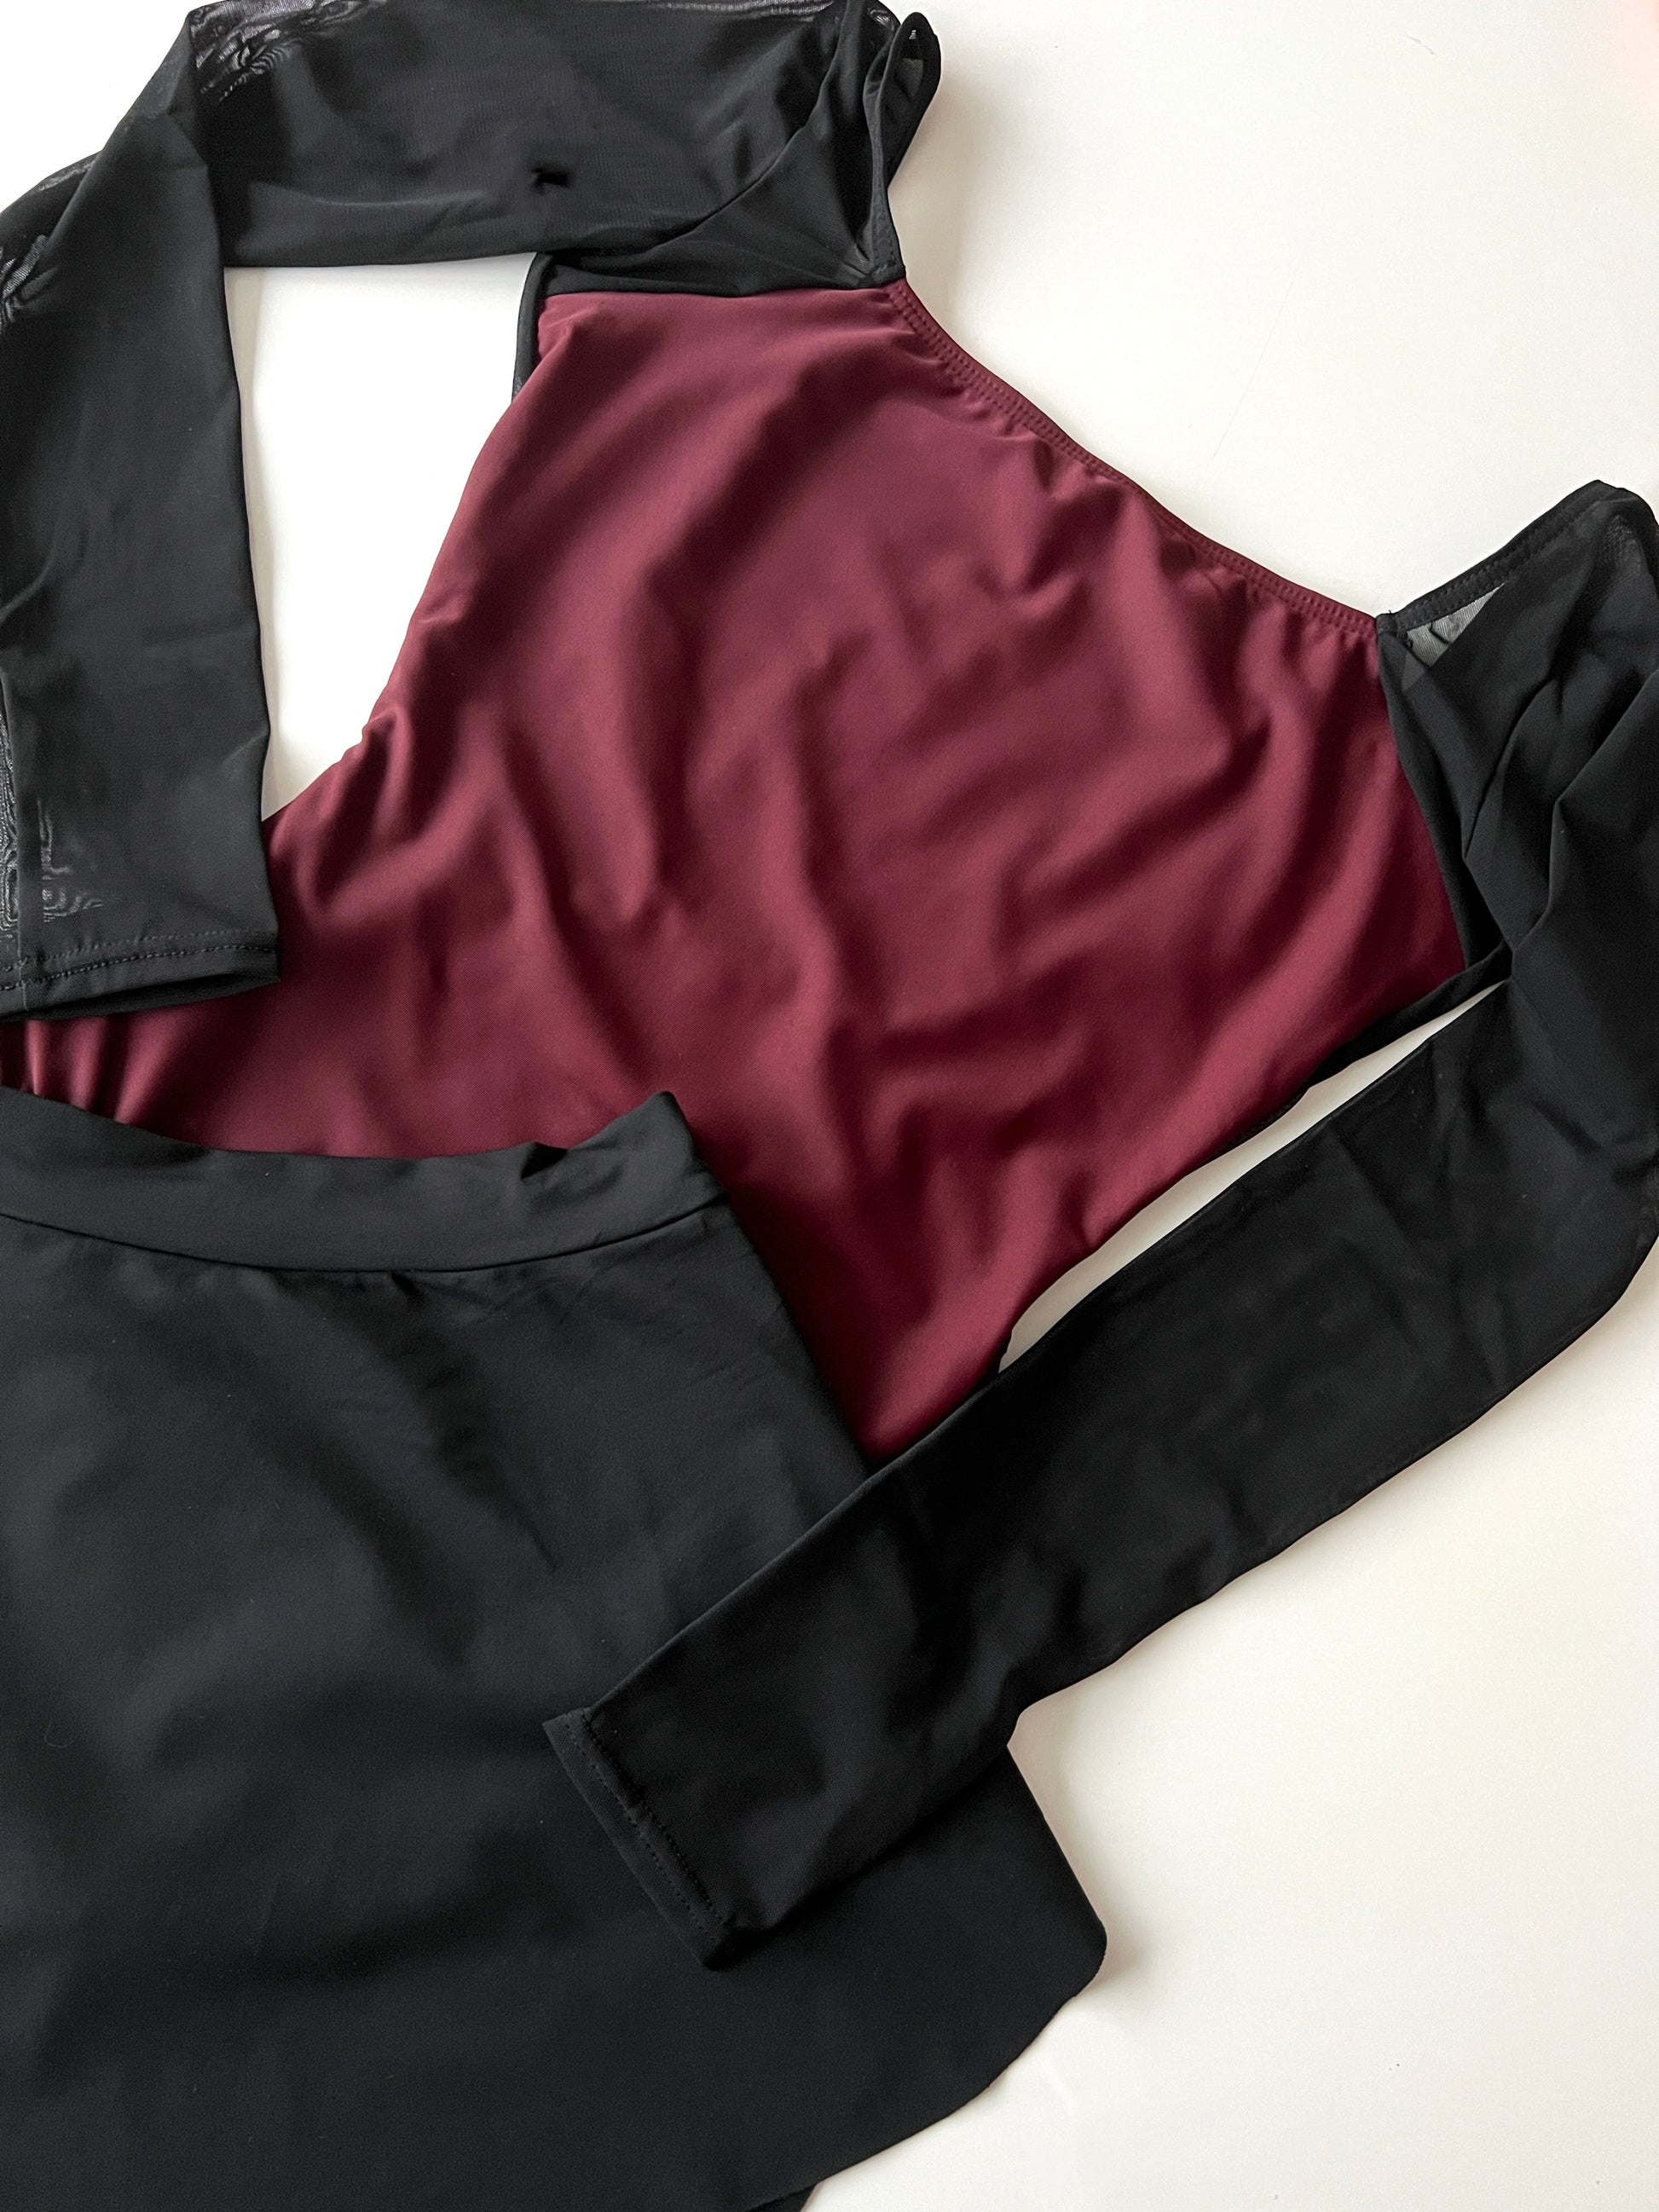 Margaux long sleeve leotard in maroon, red vine with black from The Collective Dancewear with black sab skirt